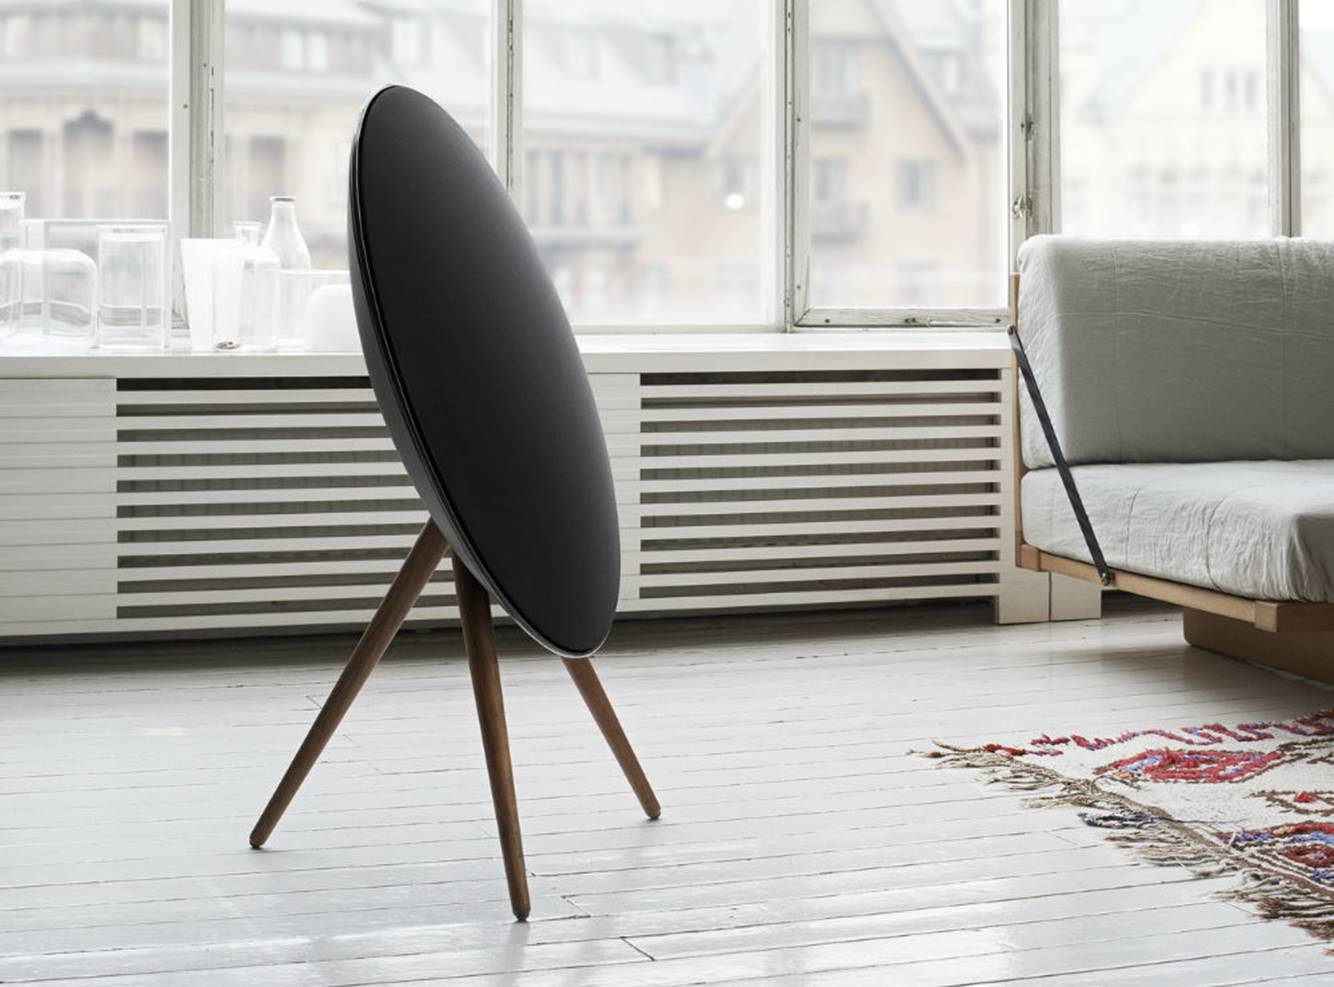 Beoplay A9 Review (4th generation) this speaker worth getting?